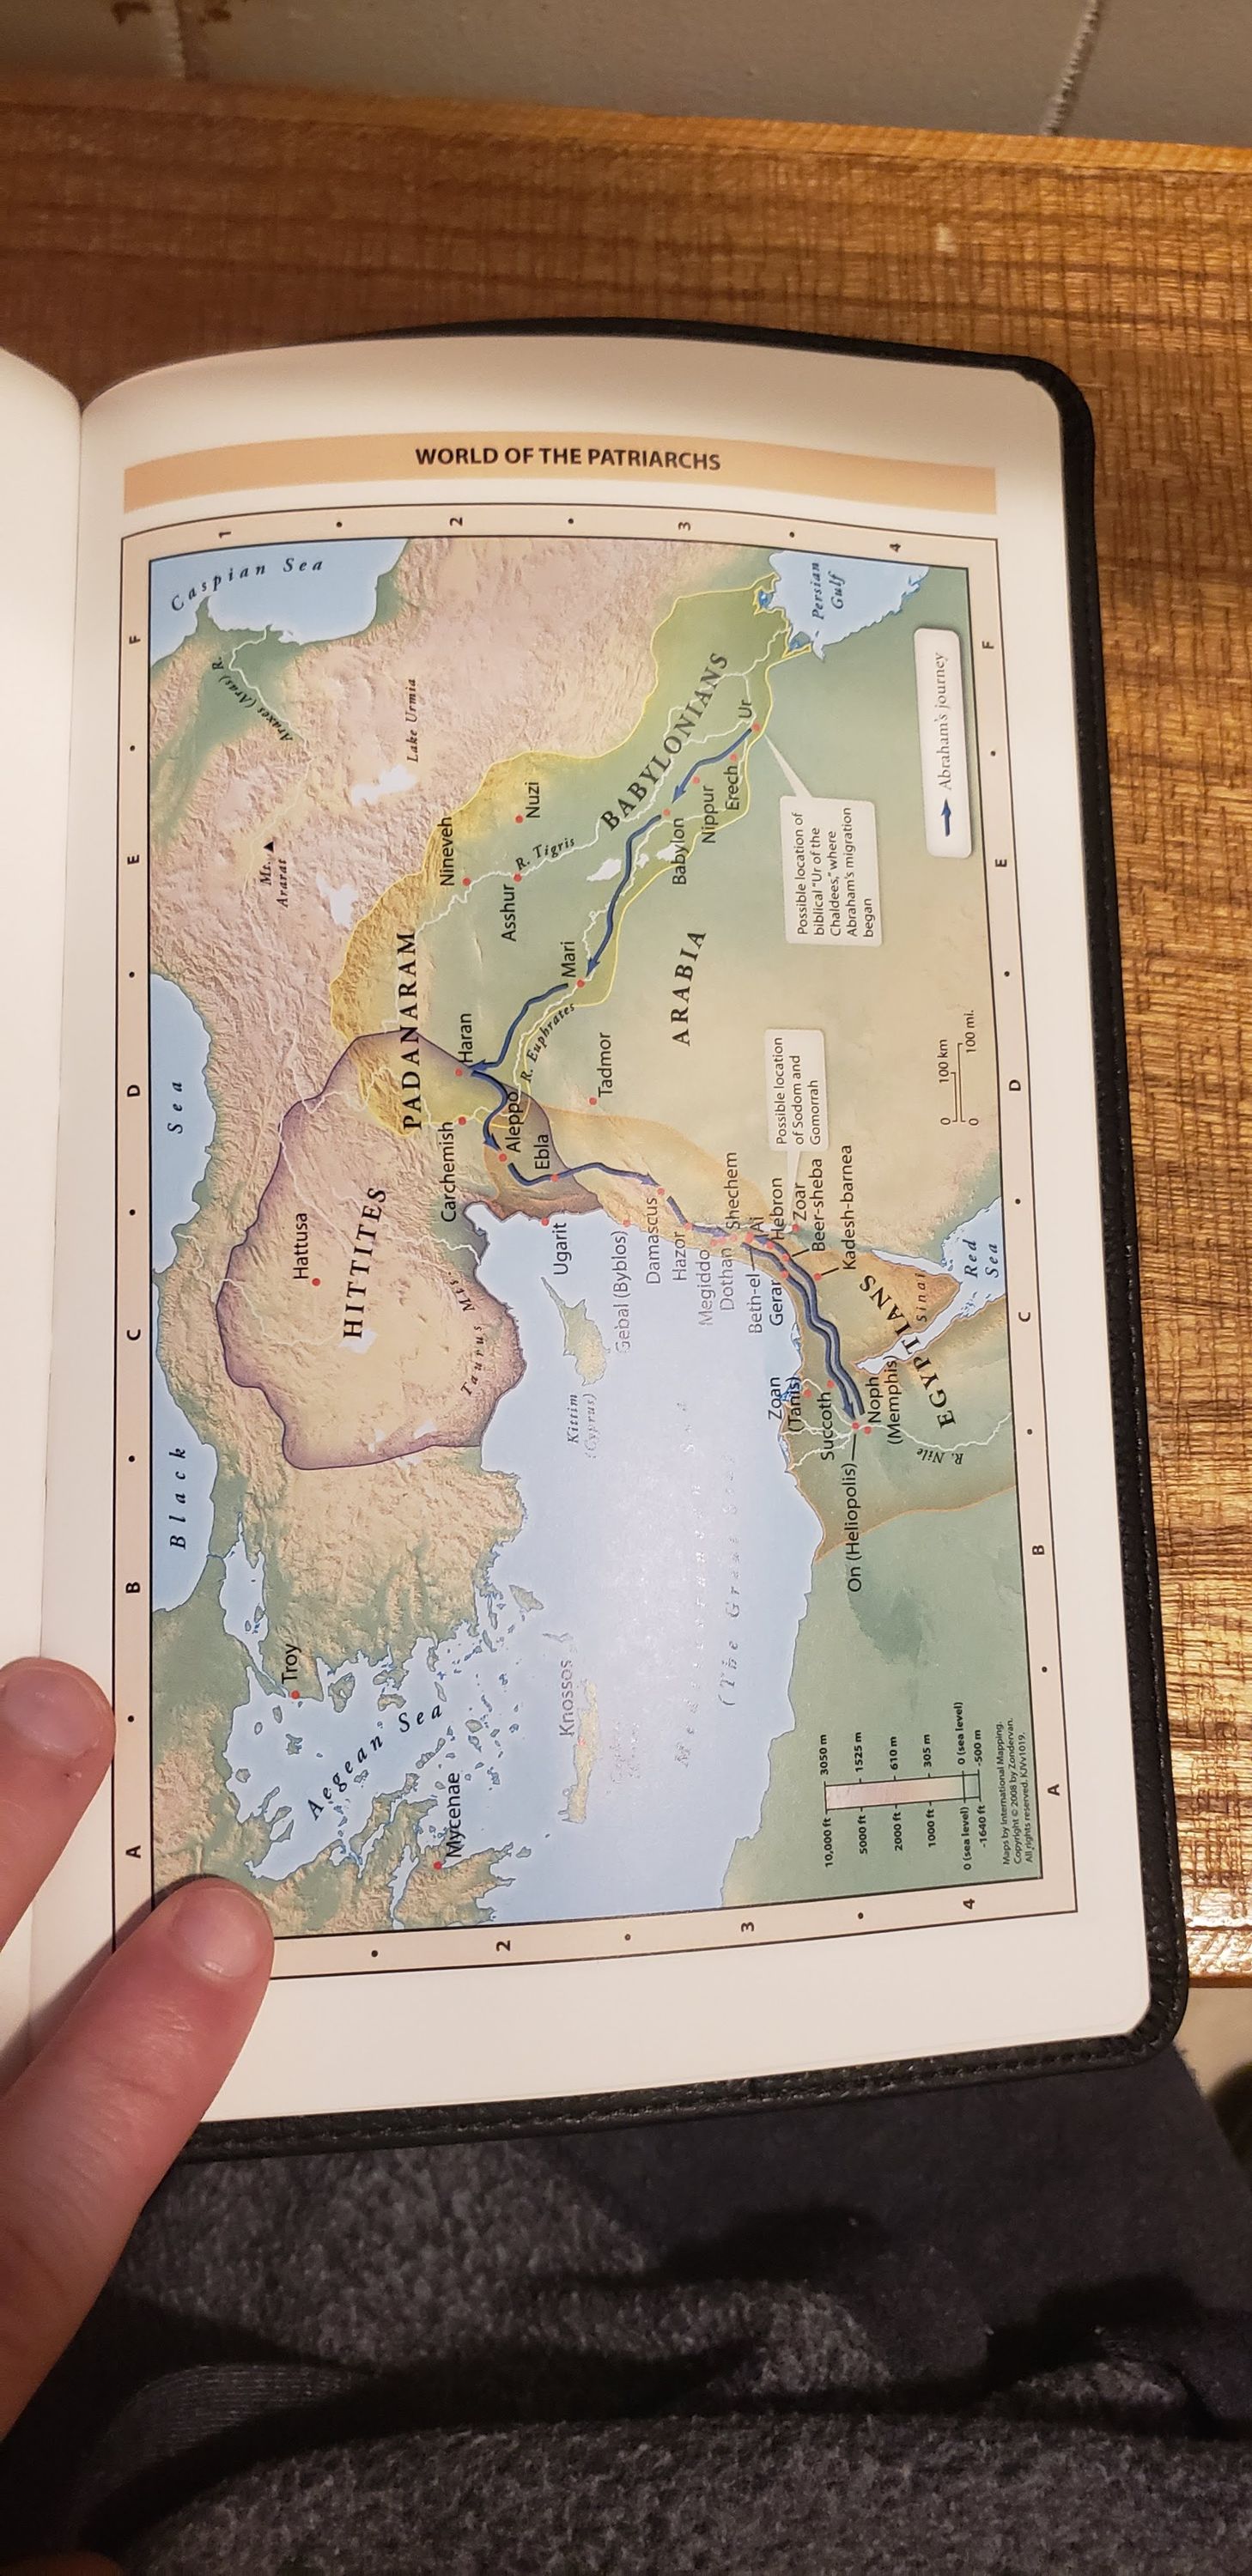 Photo of the maps at the back of the bible